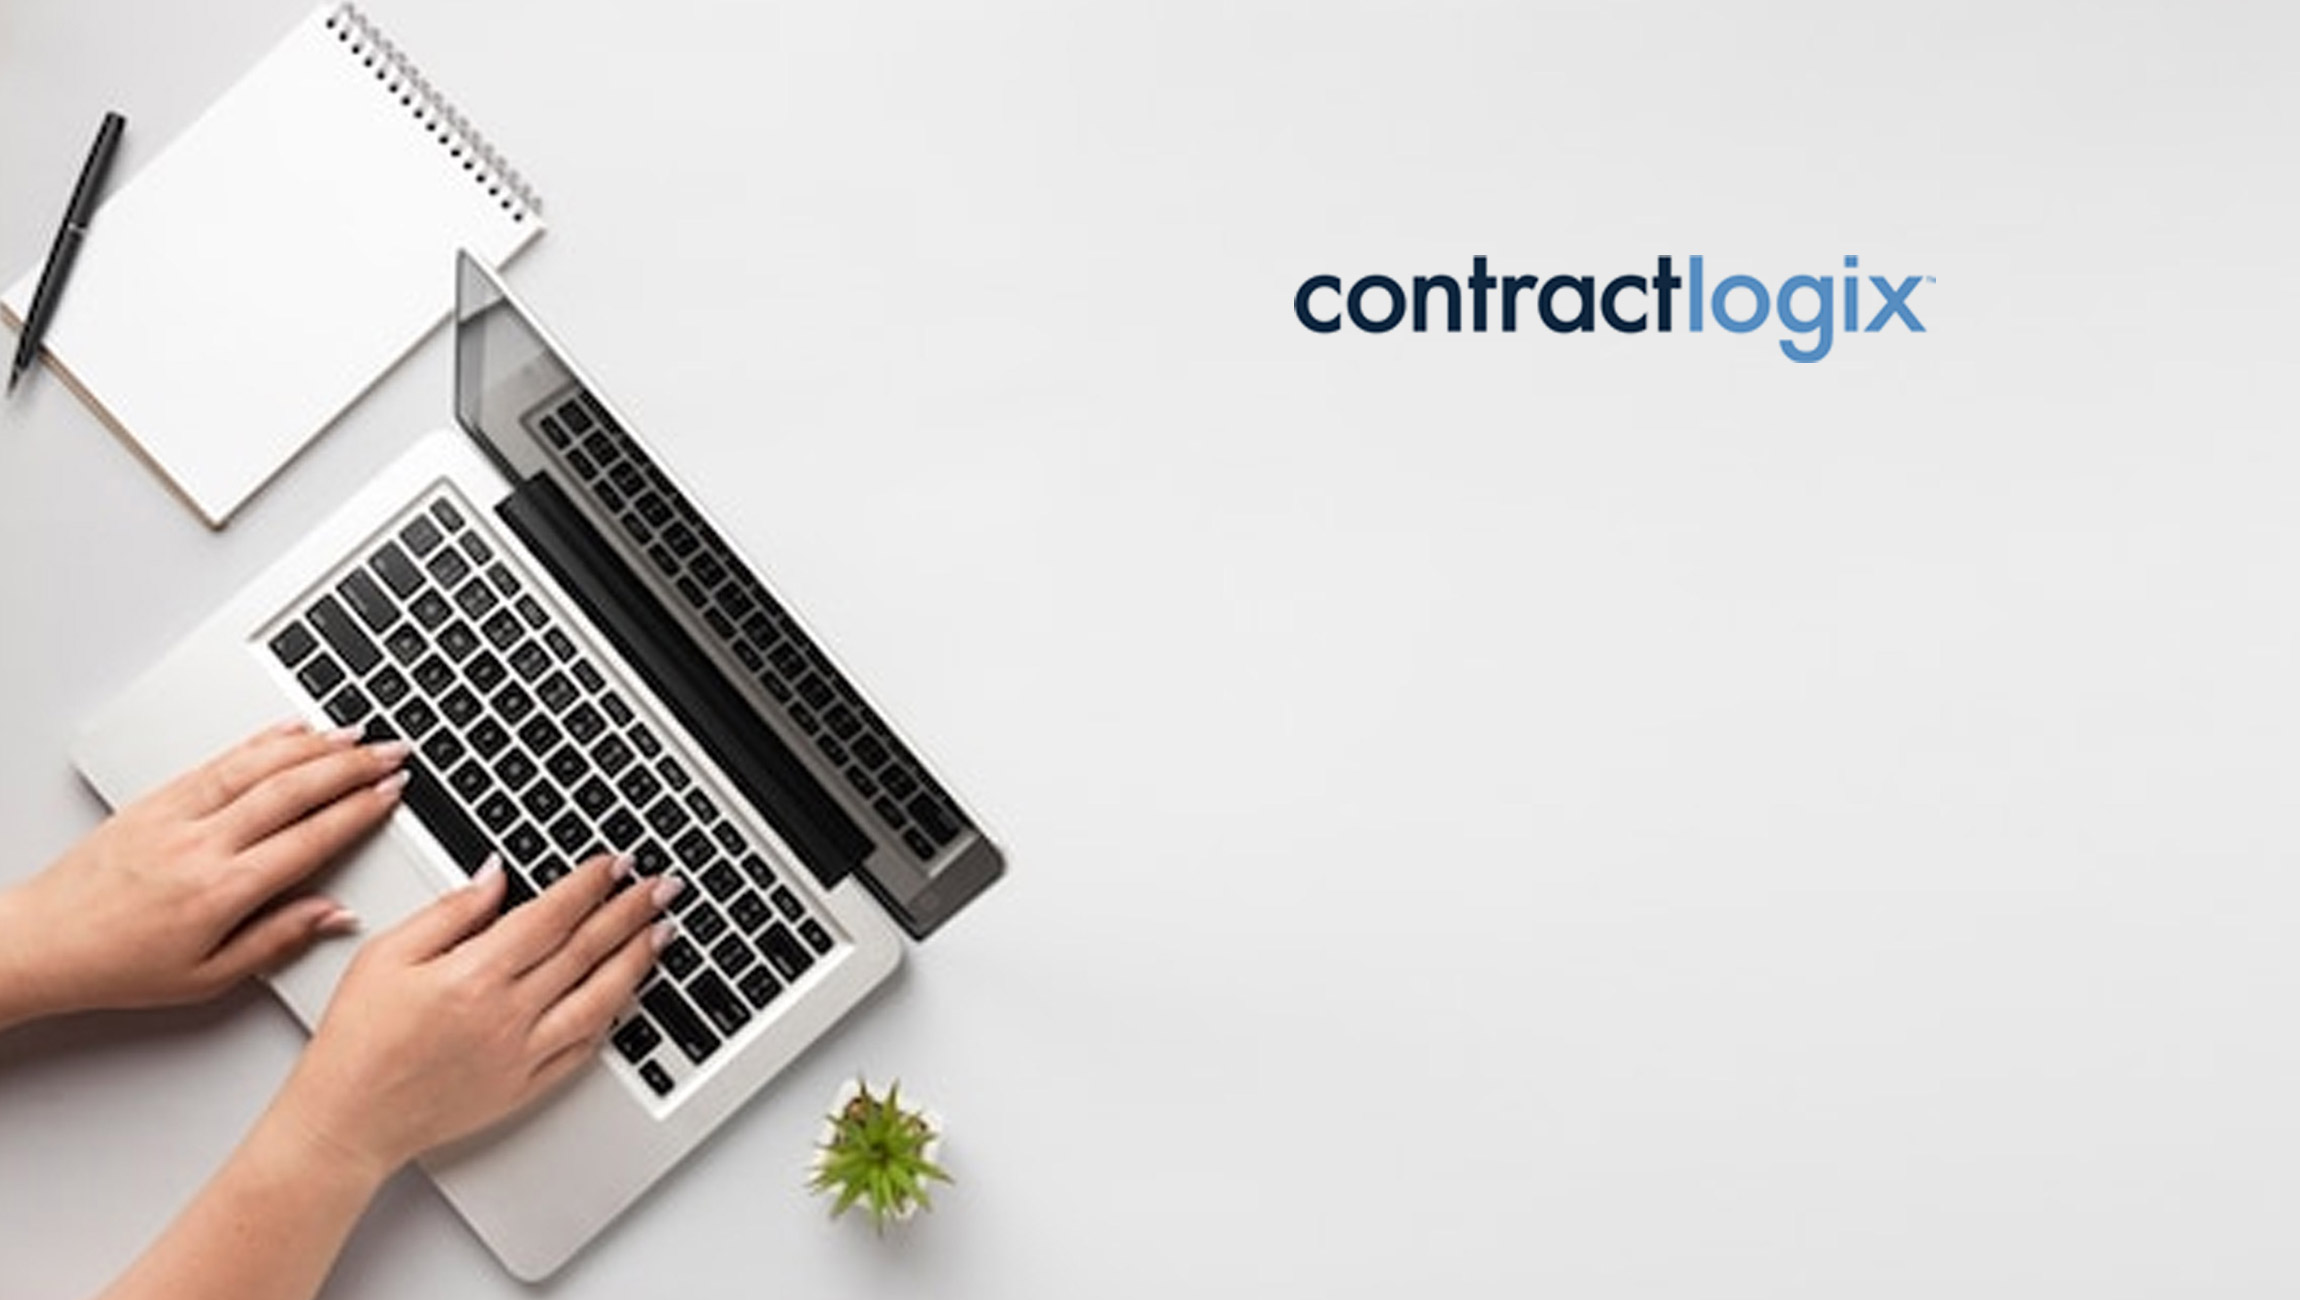 Contract-Logix-Helps-Organizations-Uncover-_-Mitigate-Contract-Risk-with-New-Metrics-Manager-Technology